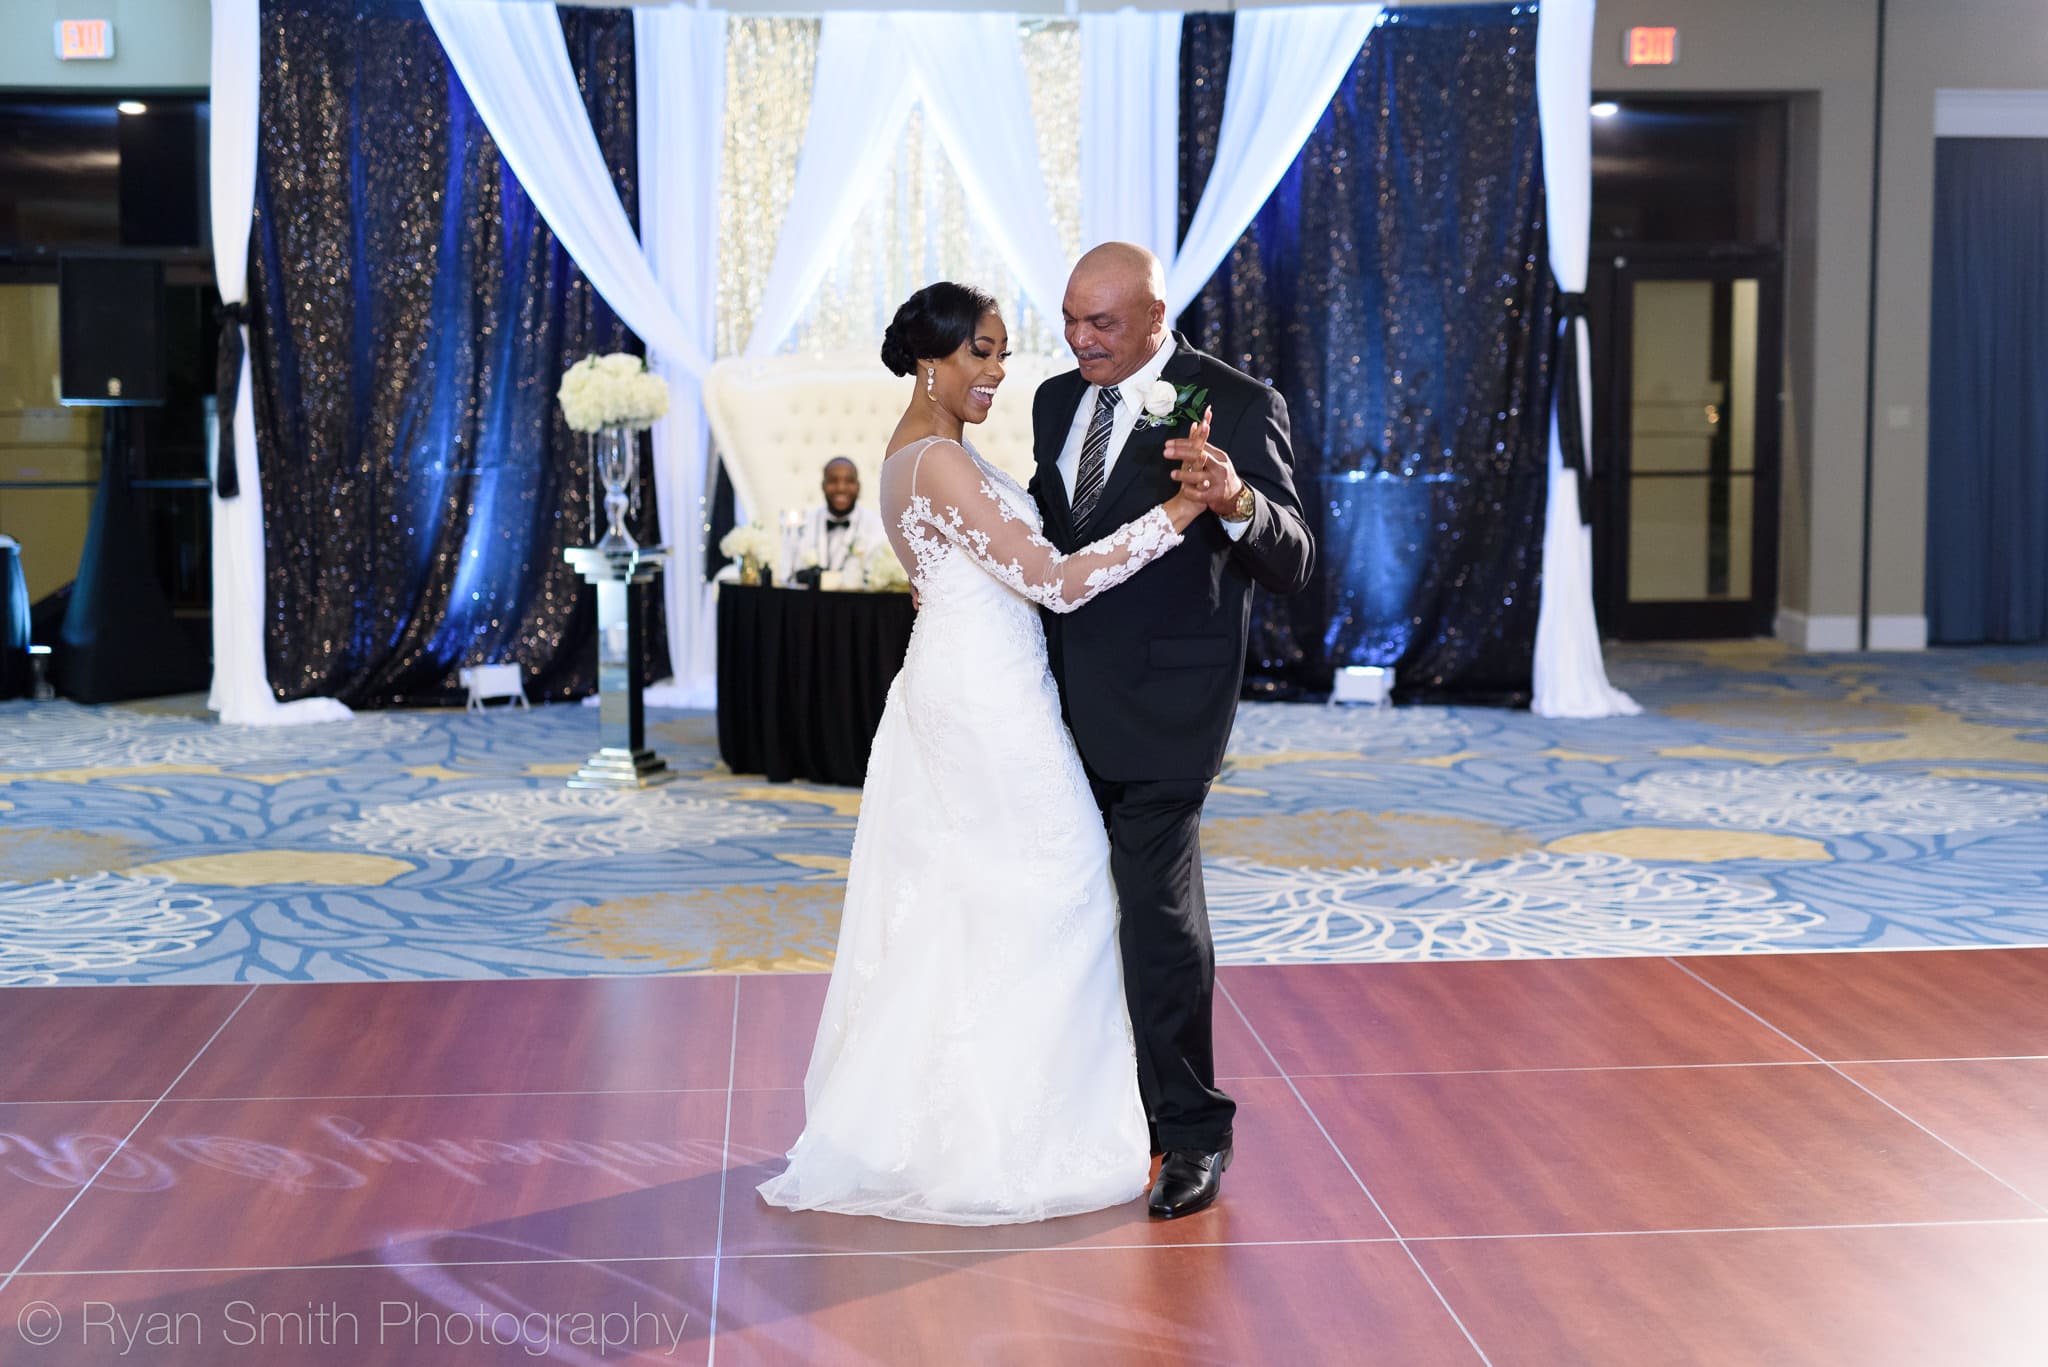 Bride dancing with father - Doubletree Resort by Hilton Myrtle Beach